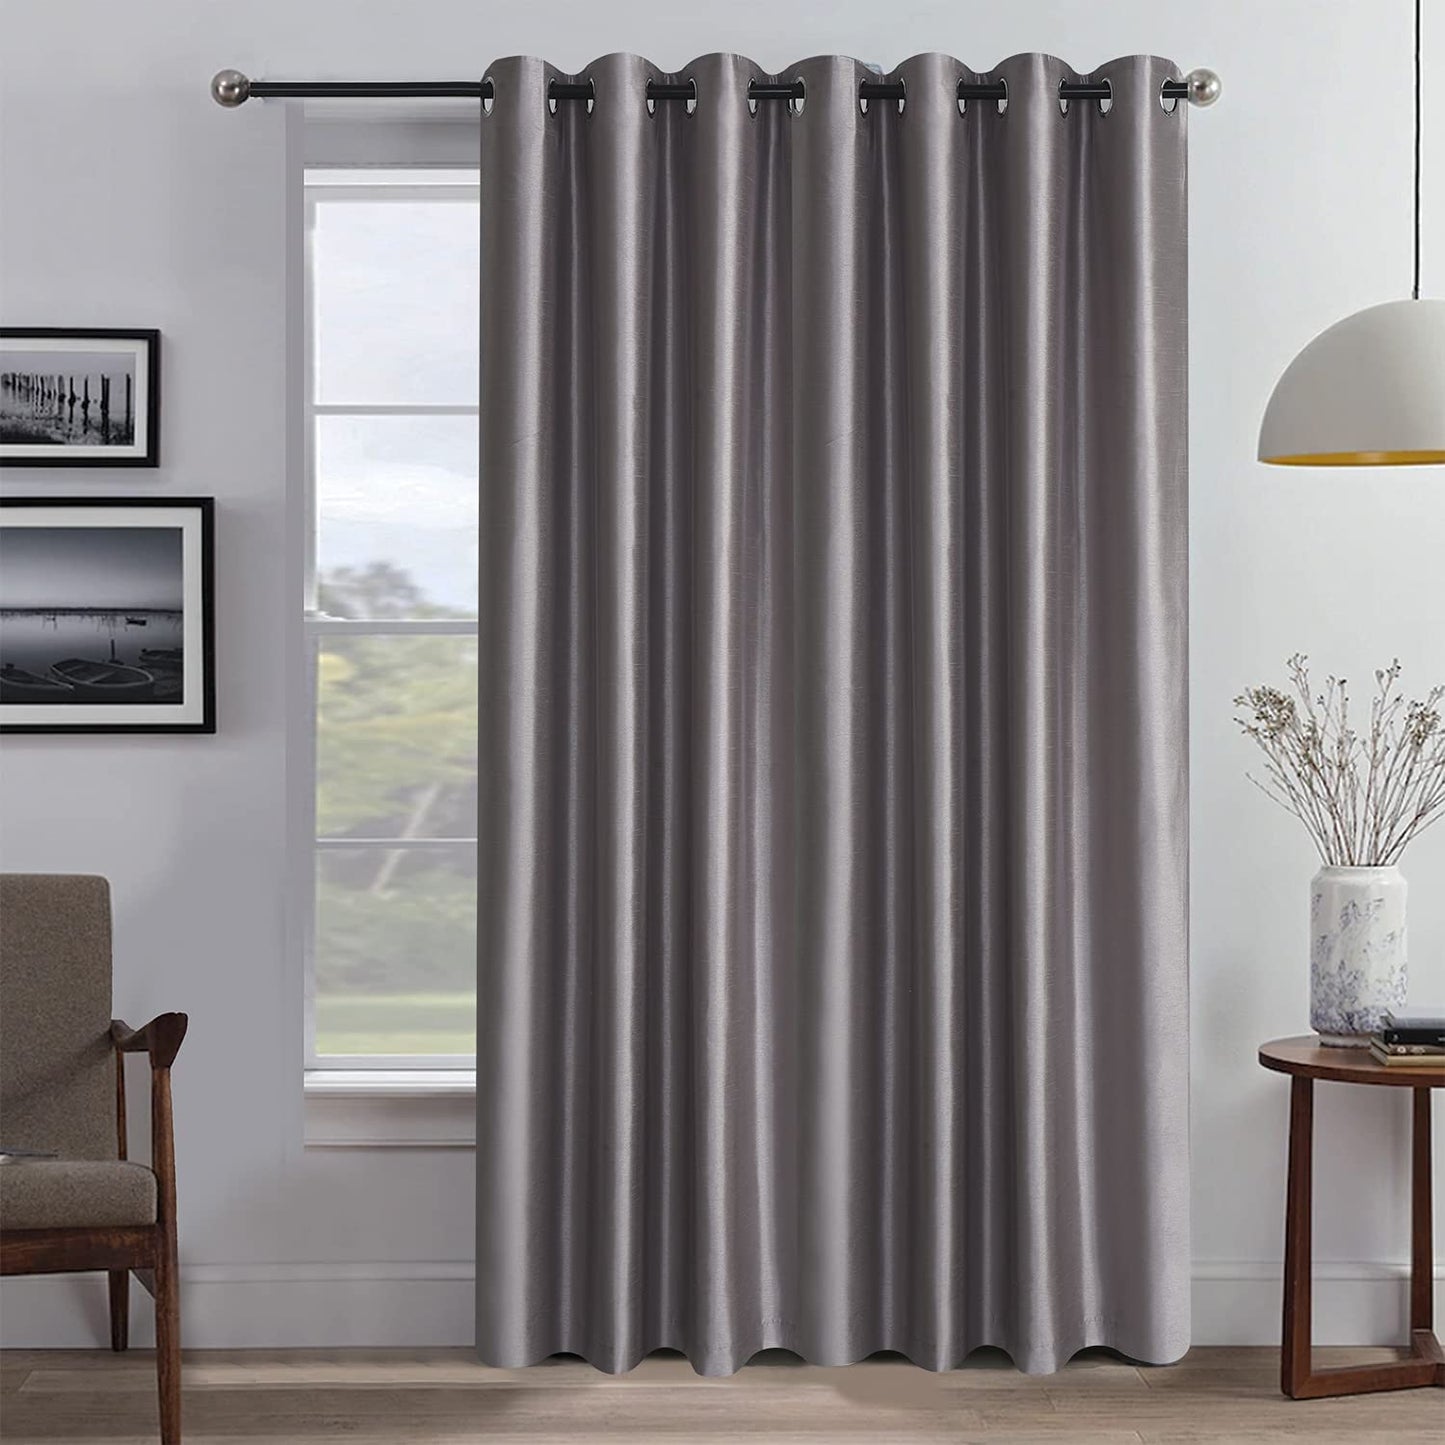 Faux Silk Extra Wide Blackout Curtains,Fully Beige Lined Solid Color Window Treatment Drapes For Patio Door,1 Panel